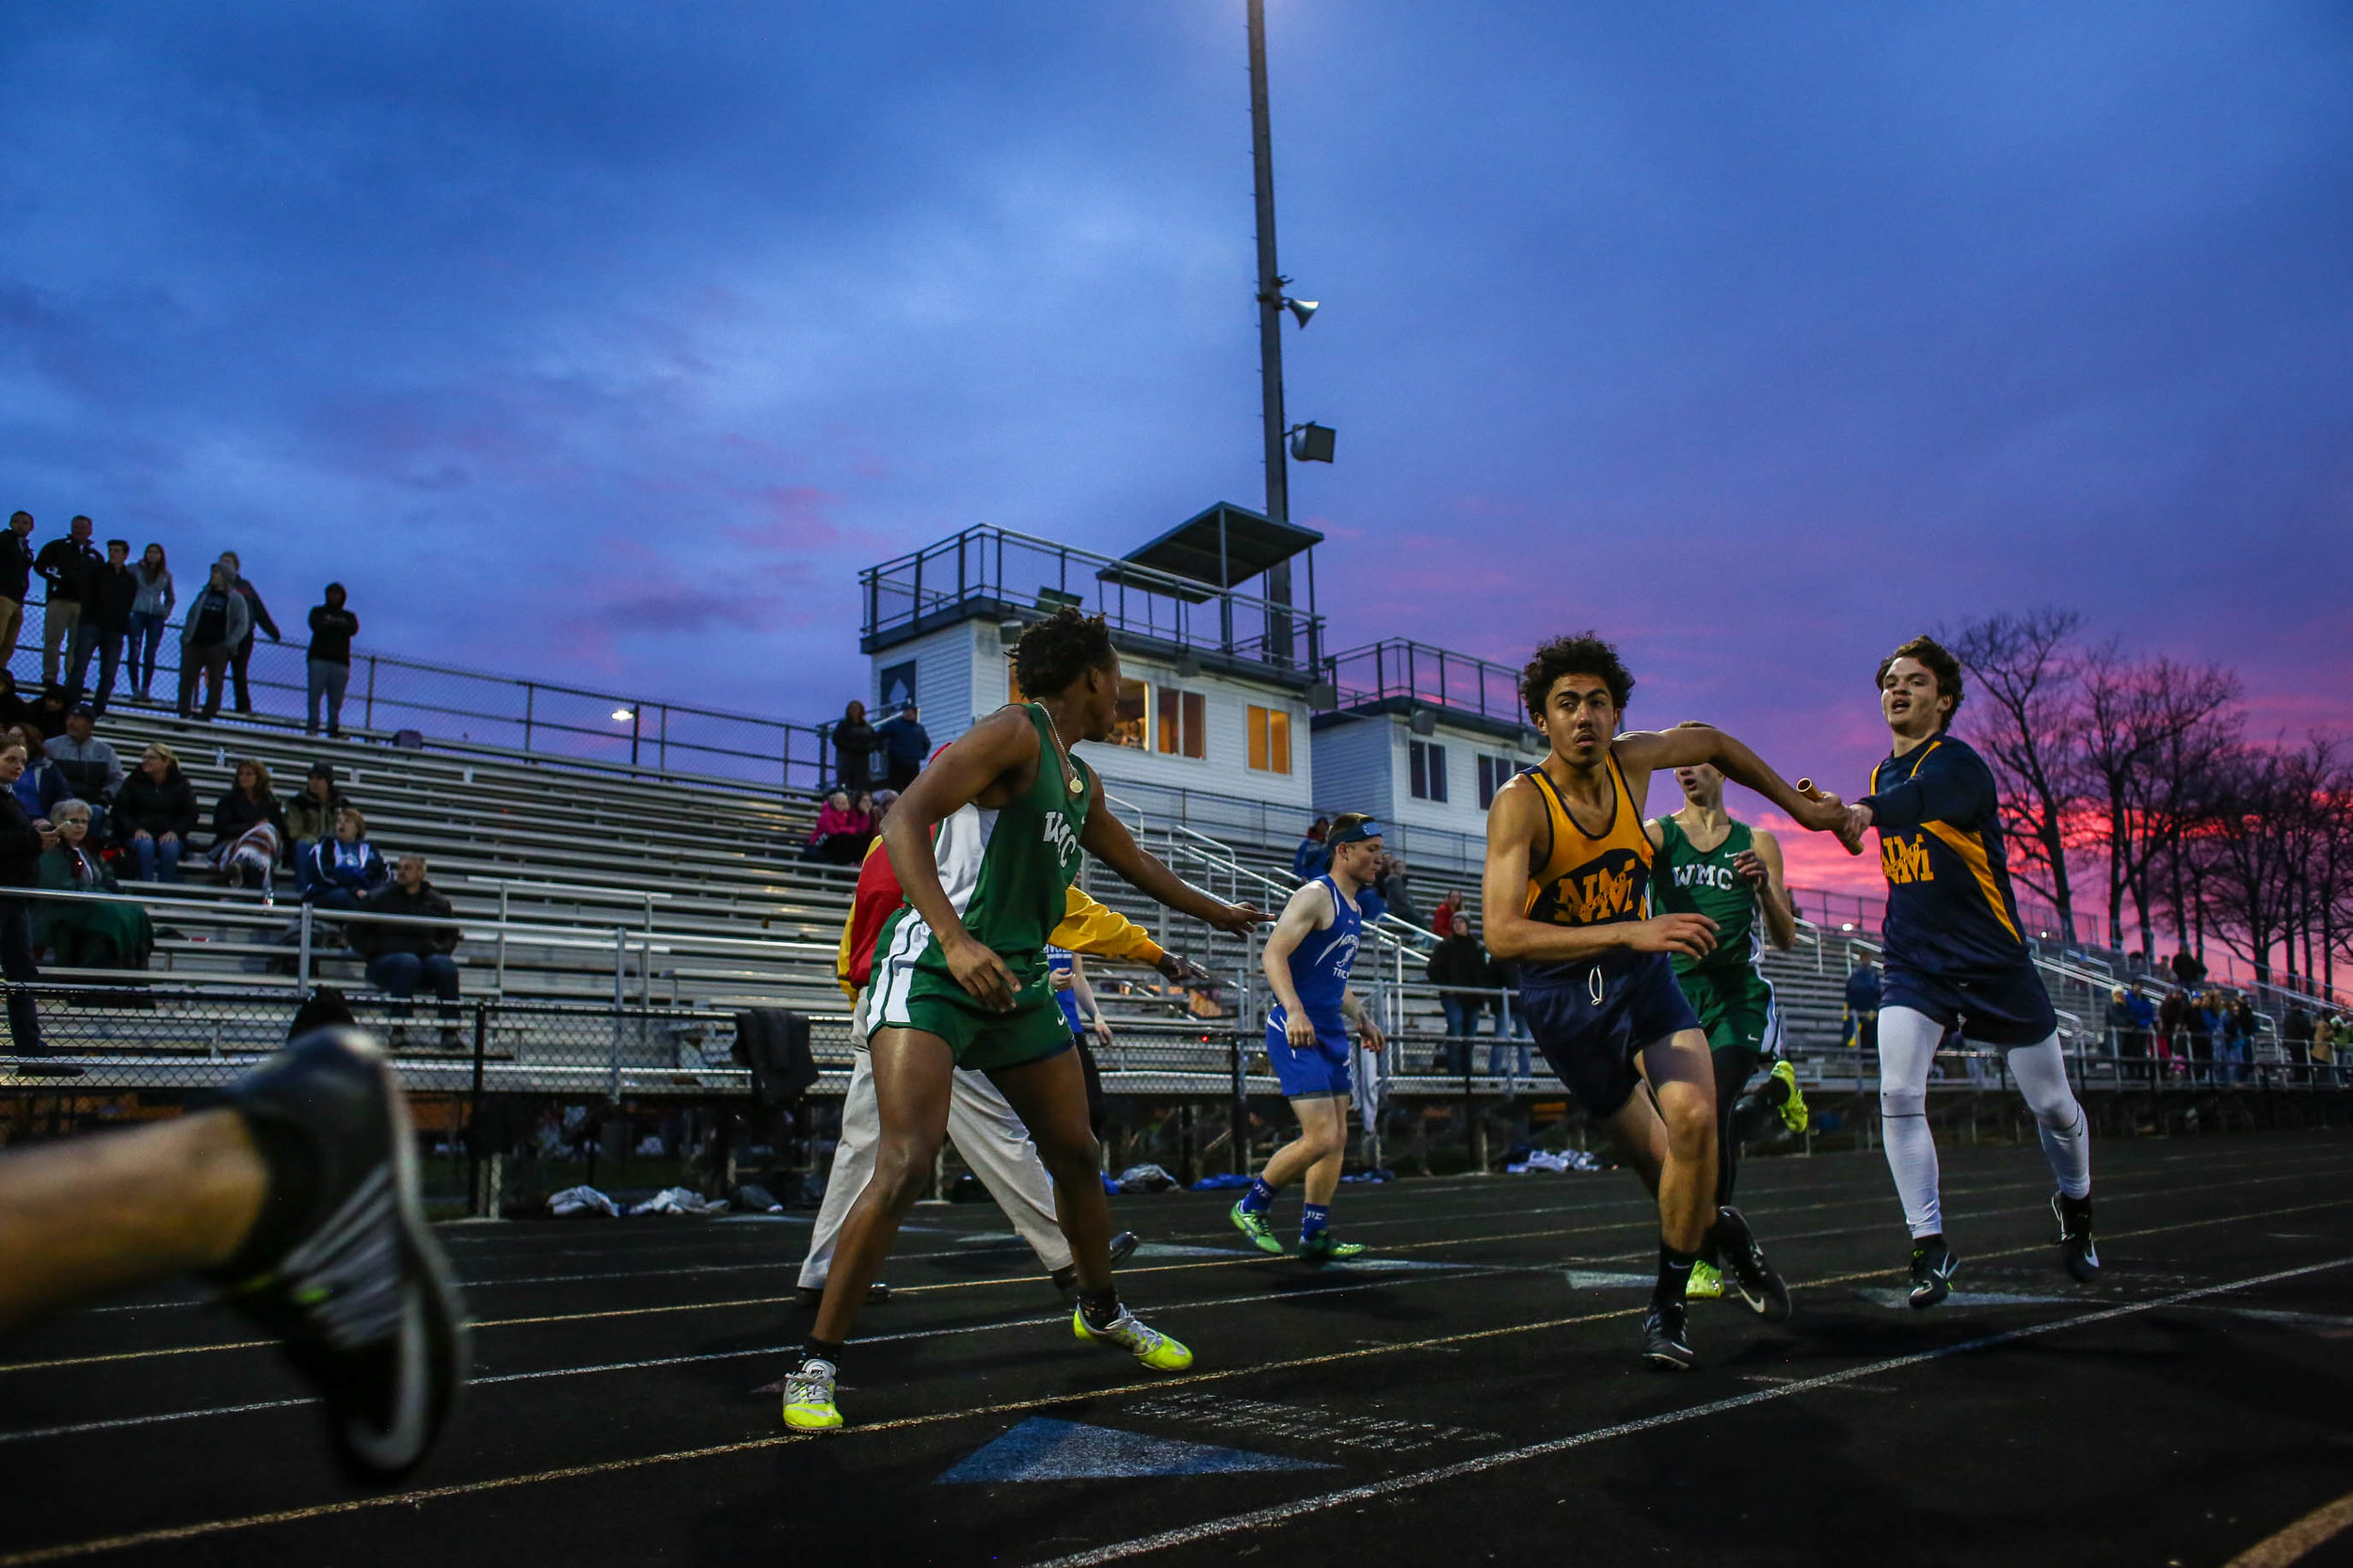  Runners make baton exchanges in the varsity boys 4x400-meter relay race during Friday's GMAA track and field meet at Fruitport High School in Fruitport, Michigan on May 3, 2019. 